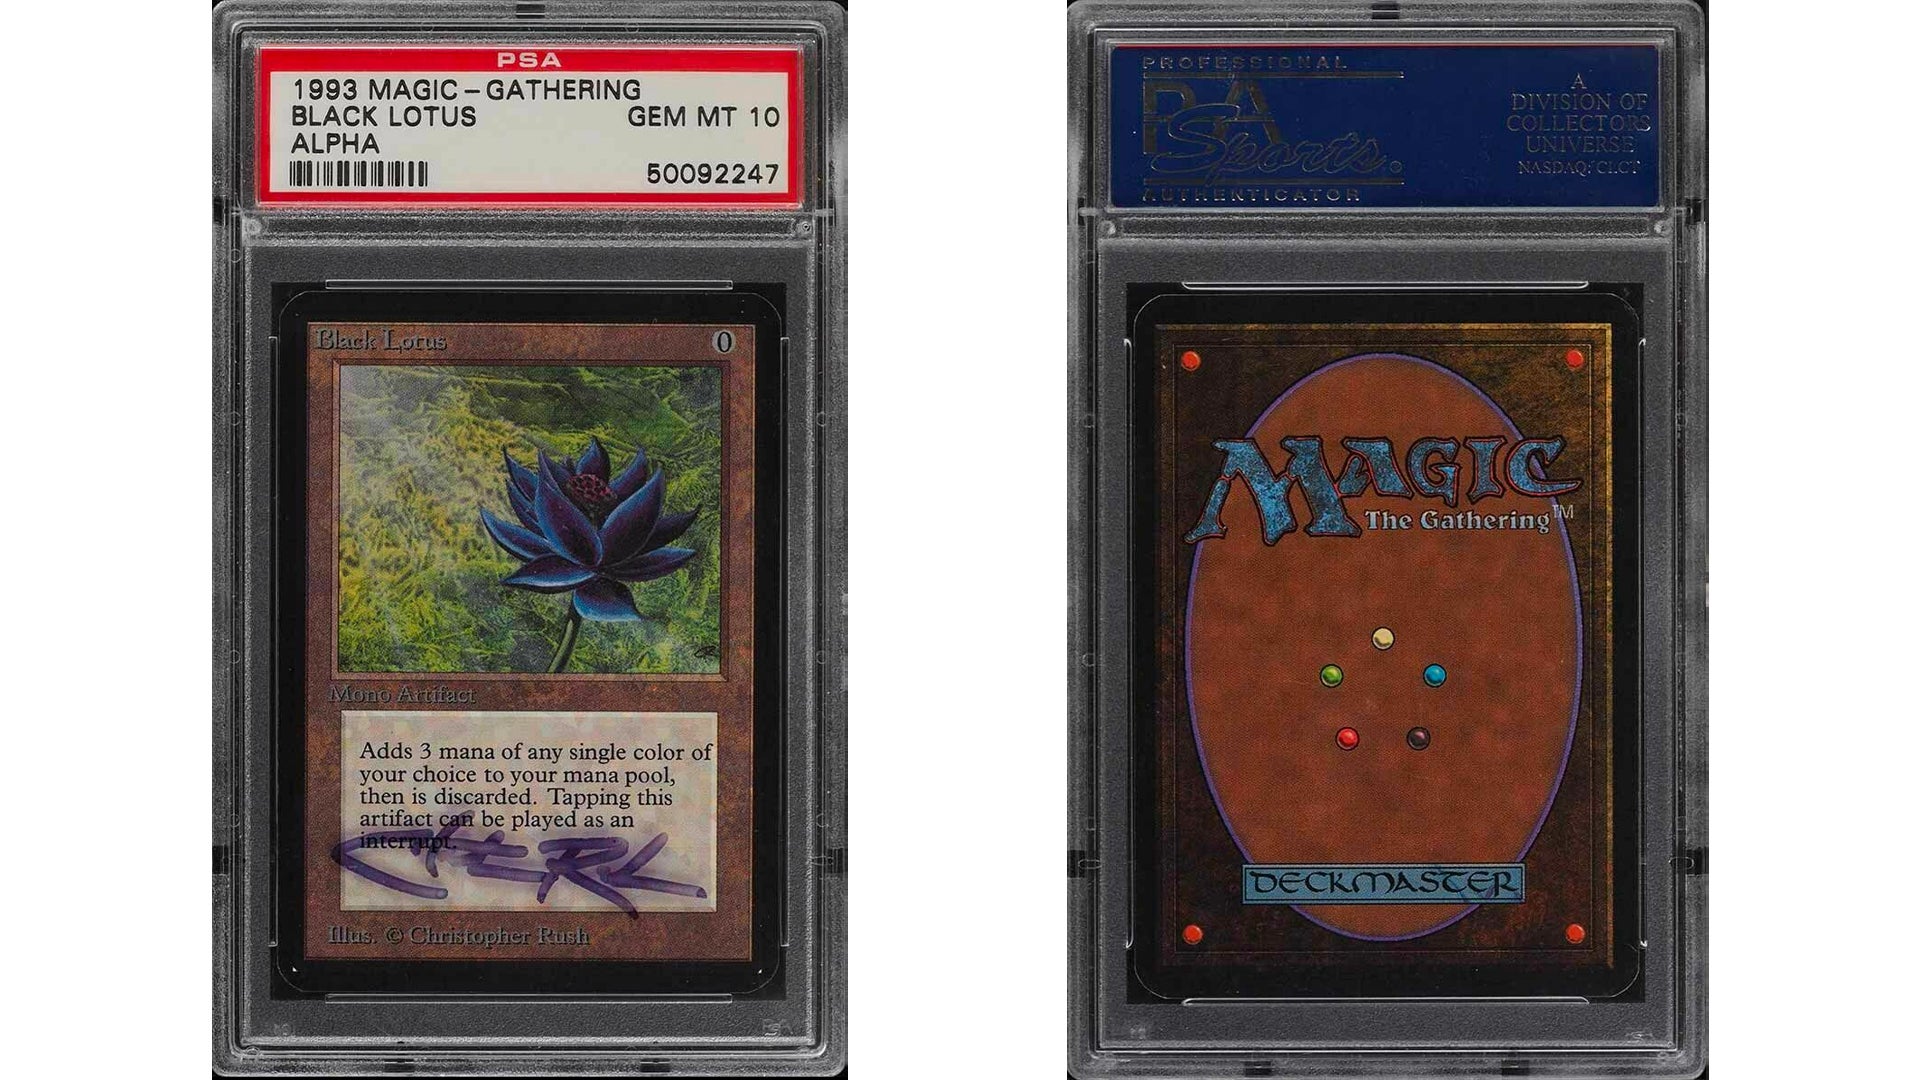 Autographed Black Lotus just became the most expensive Magic: The Gathering card sold at auction ...